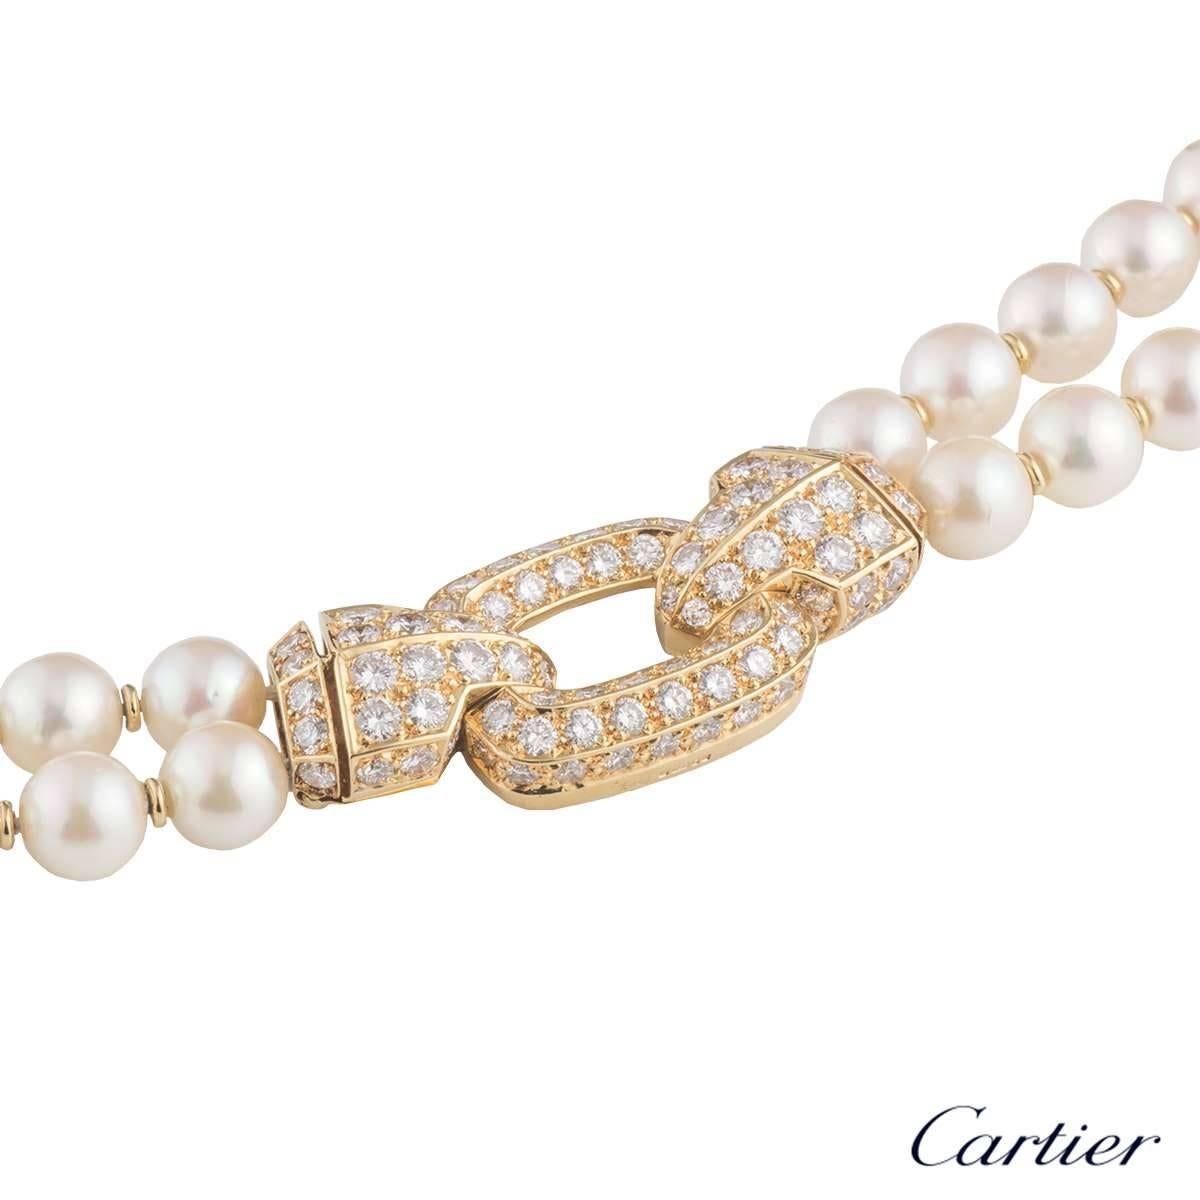  A beautiful 18k yellow gold Cartier diamond and pearl necklace. The necklace comprises of two strands of pearls, each at slightly different lengths. The inner strand consists of 51 pearls with gold dividers in between each. The outer strand